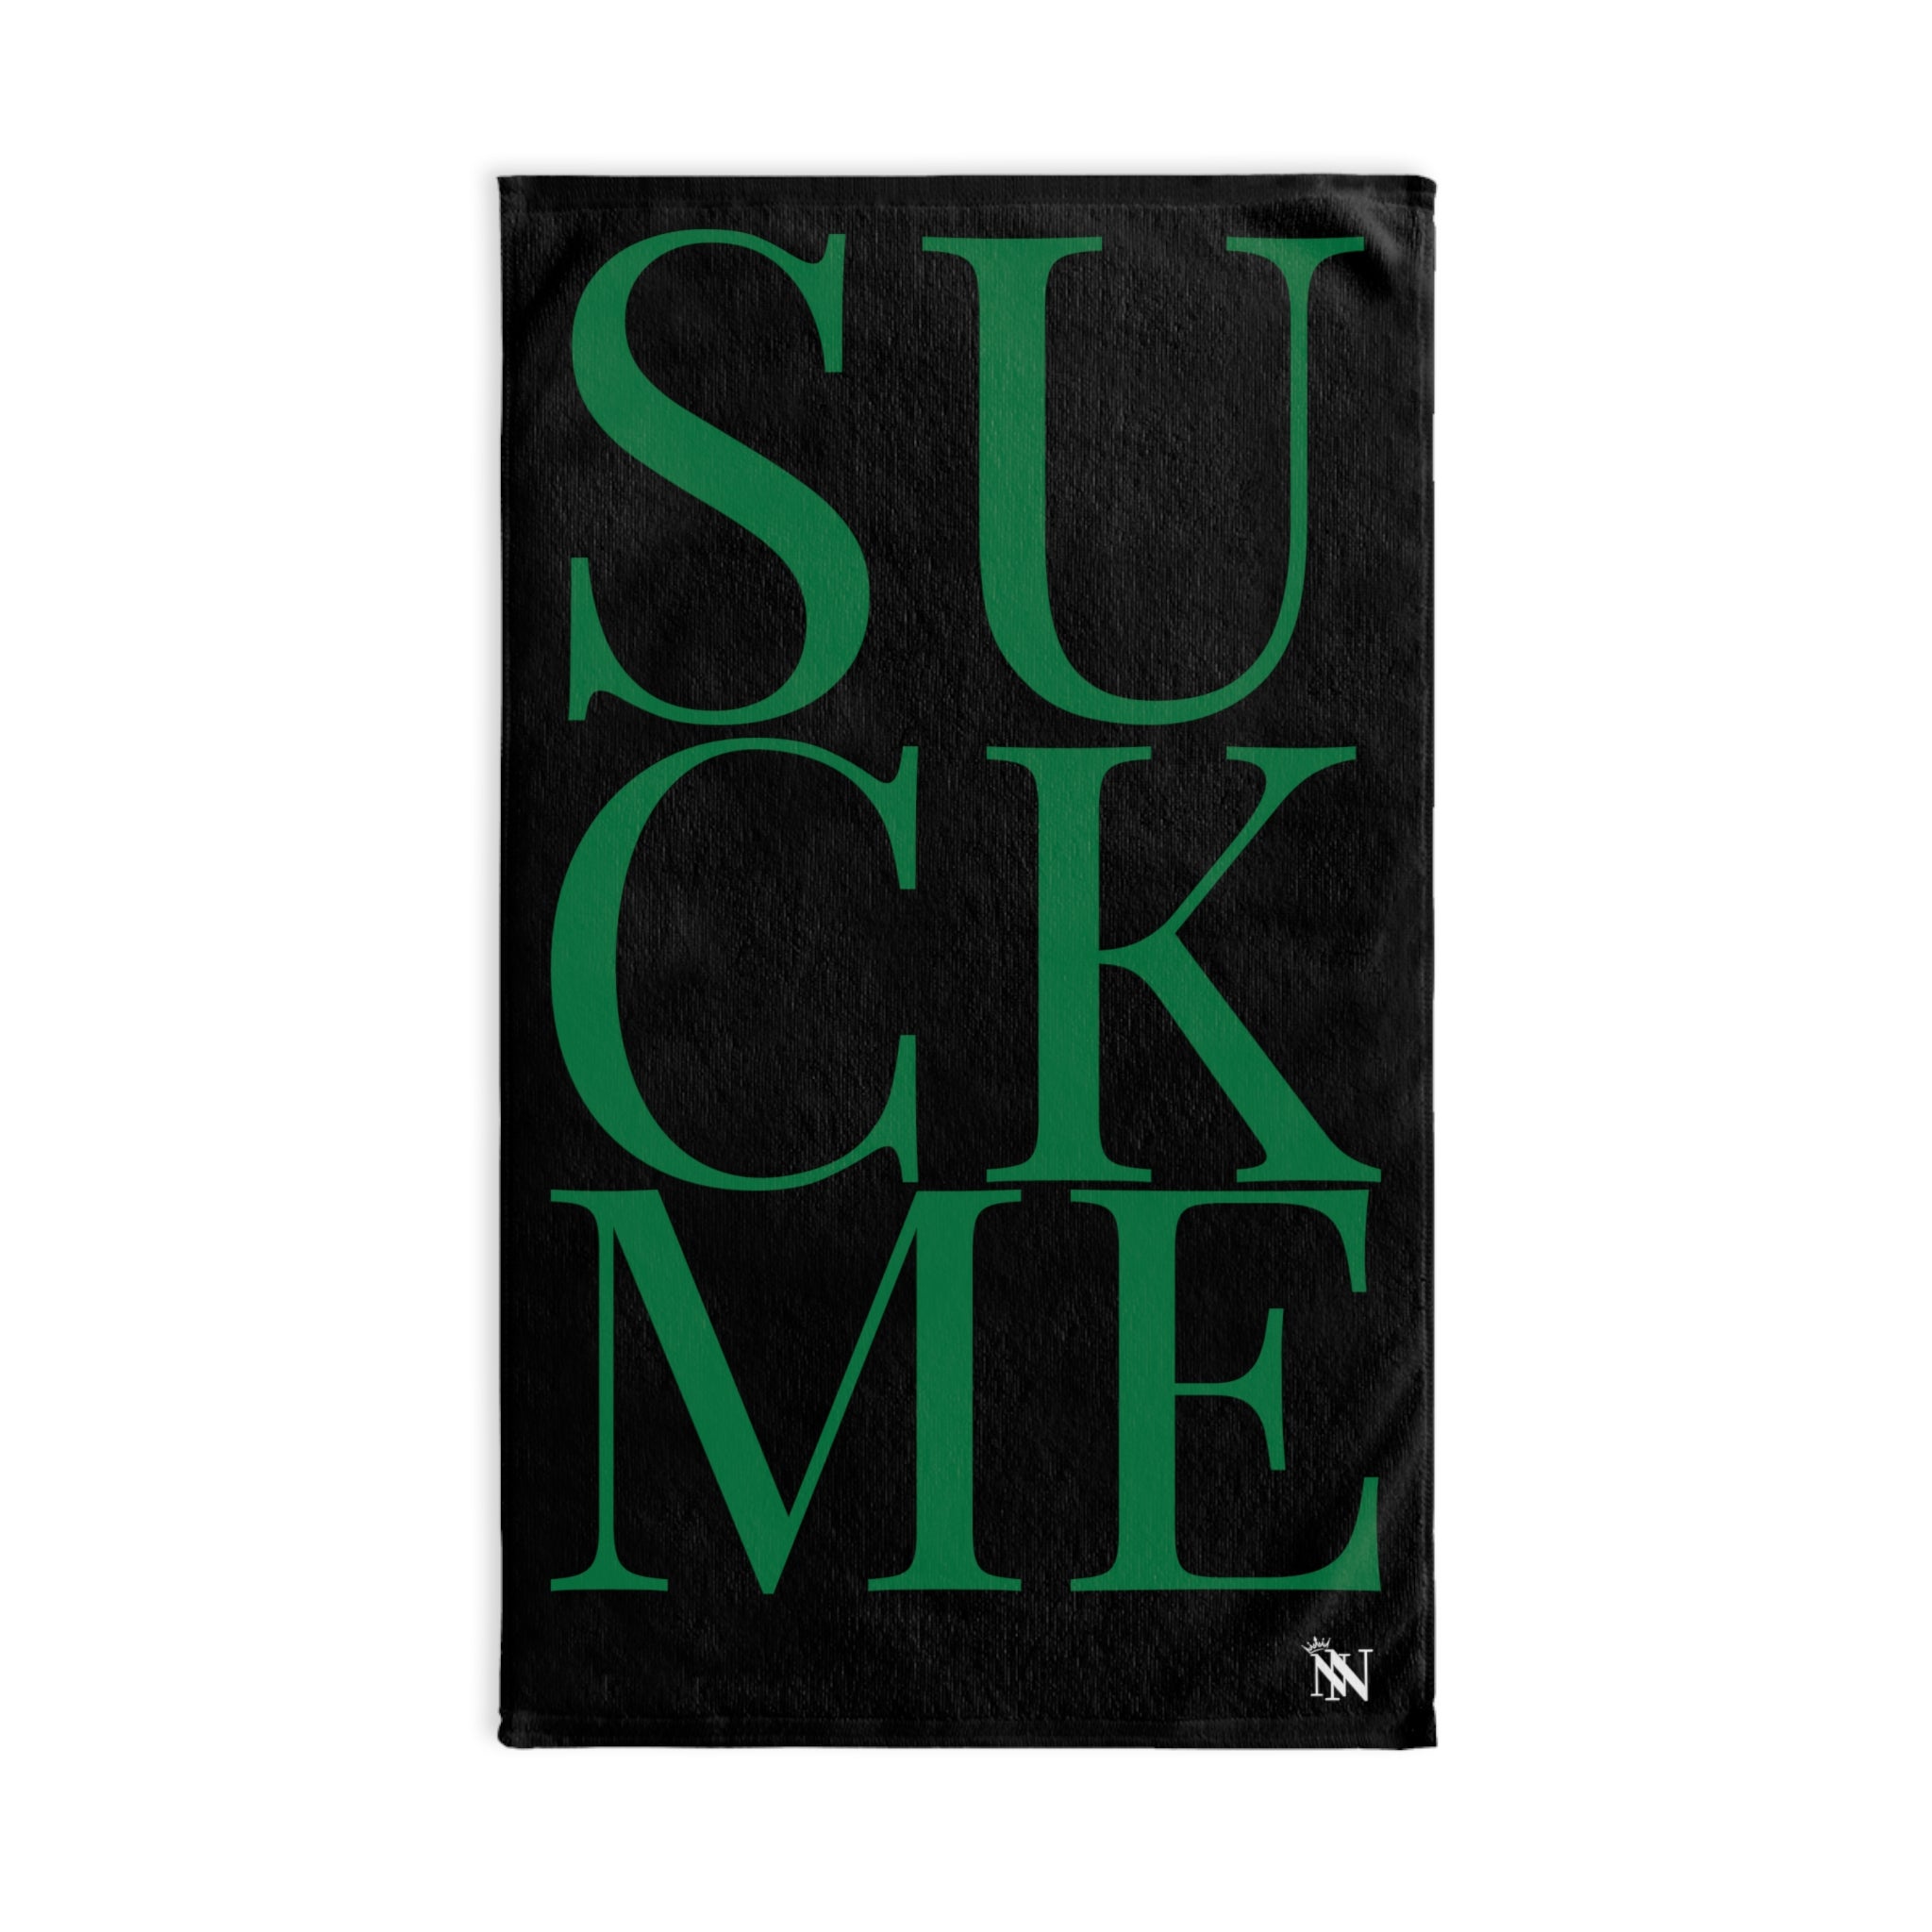 Green Suck Me Black | Sexy Gifts for Boyfriend, Funny Towel Romantic Gift for Wedding Couple Fiance First Year 2nd Anniversary Valentines, Party Gag Gifts, Joke Humor Cloth for Husband Men BF NECTAR NAPKINS